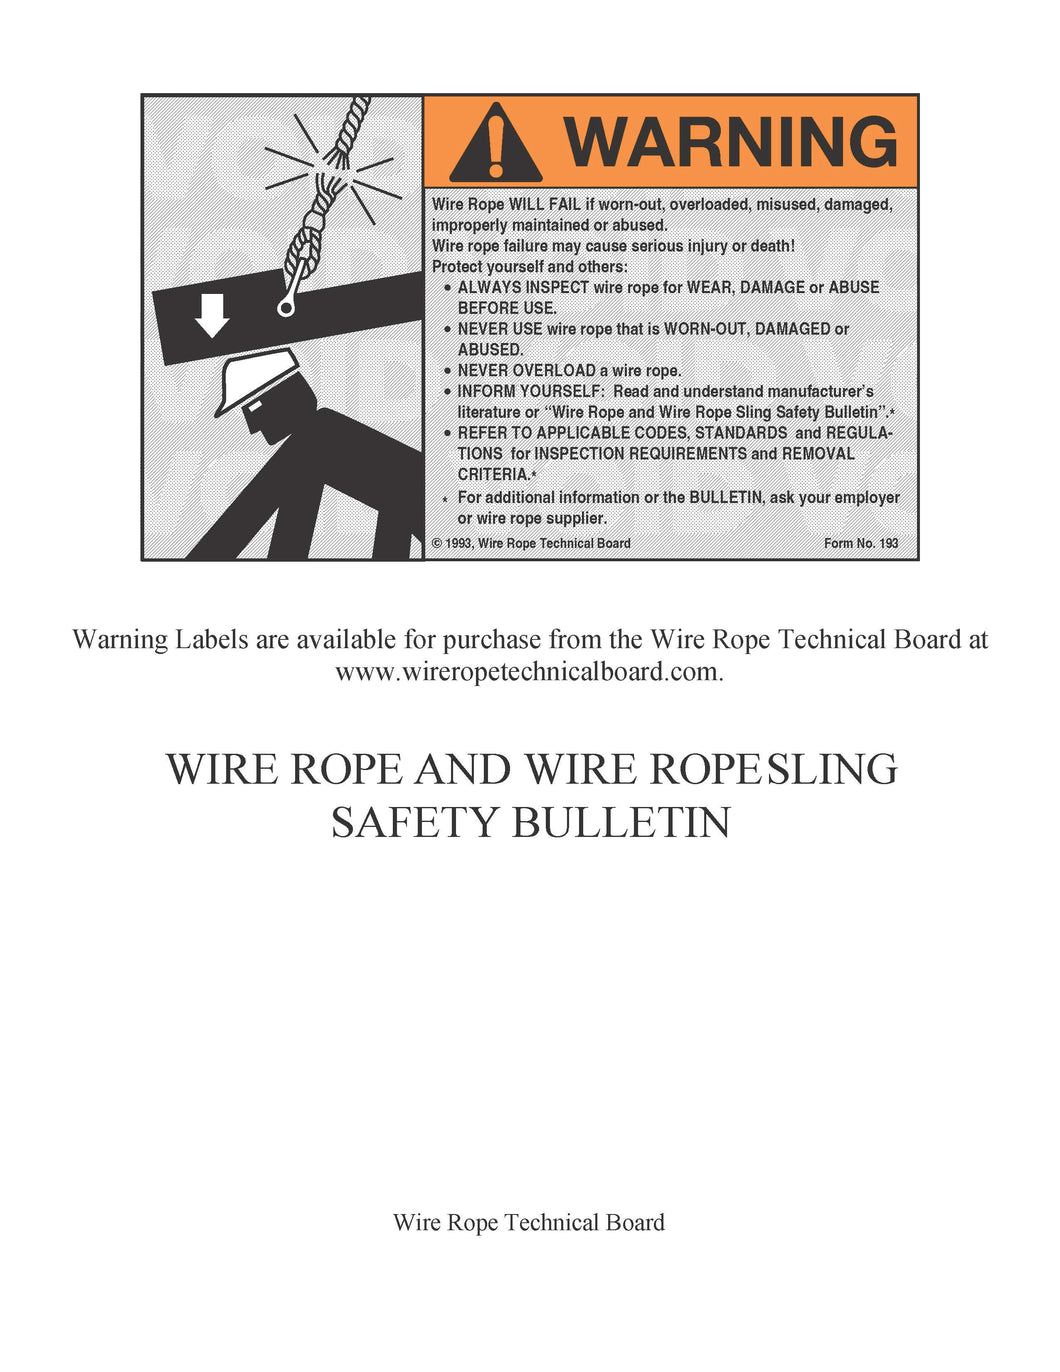 Wire rope wear damage inspection guide // Source